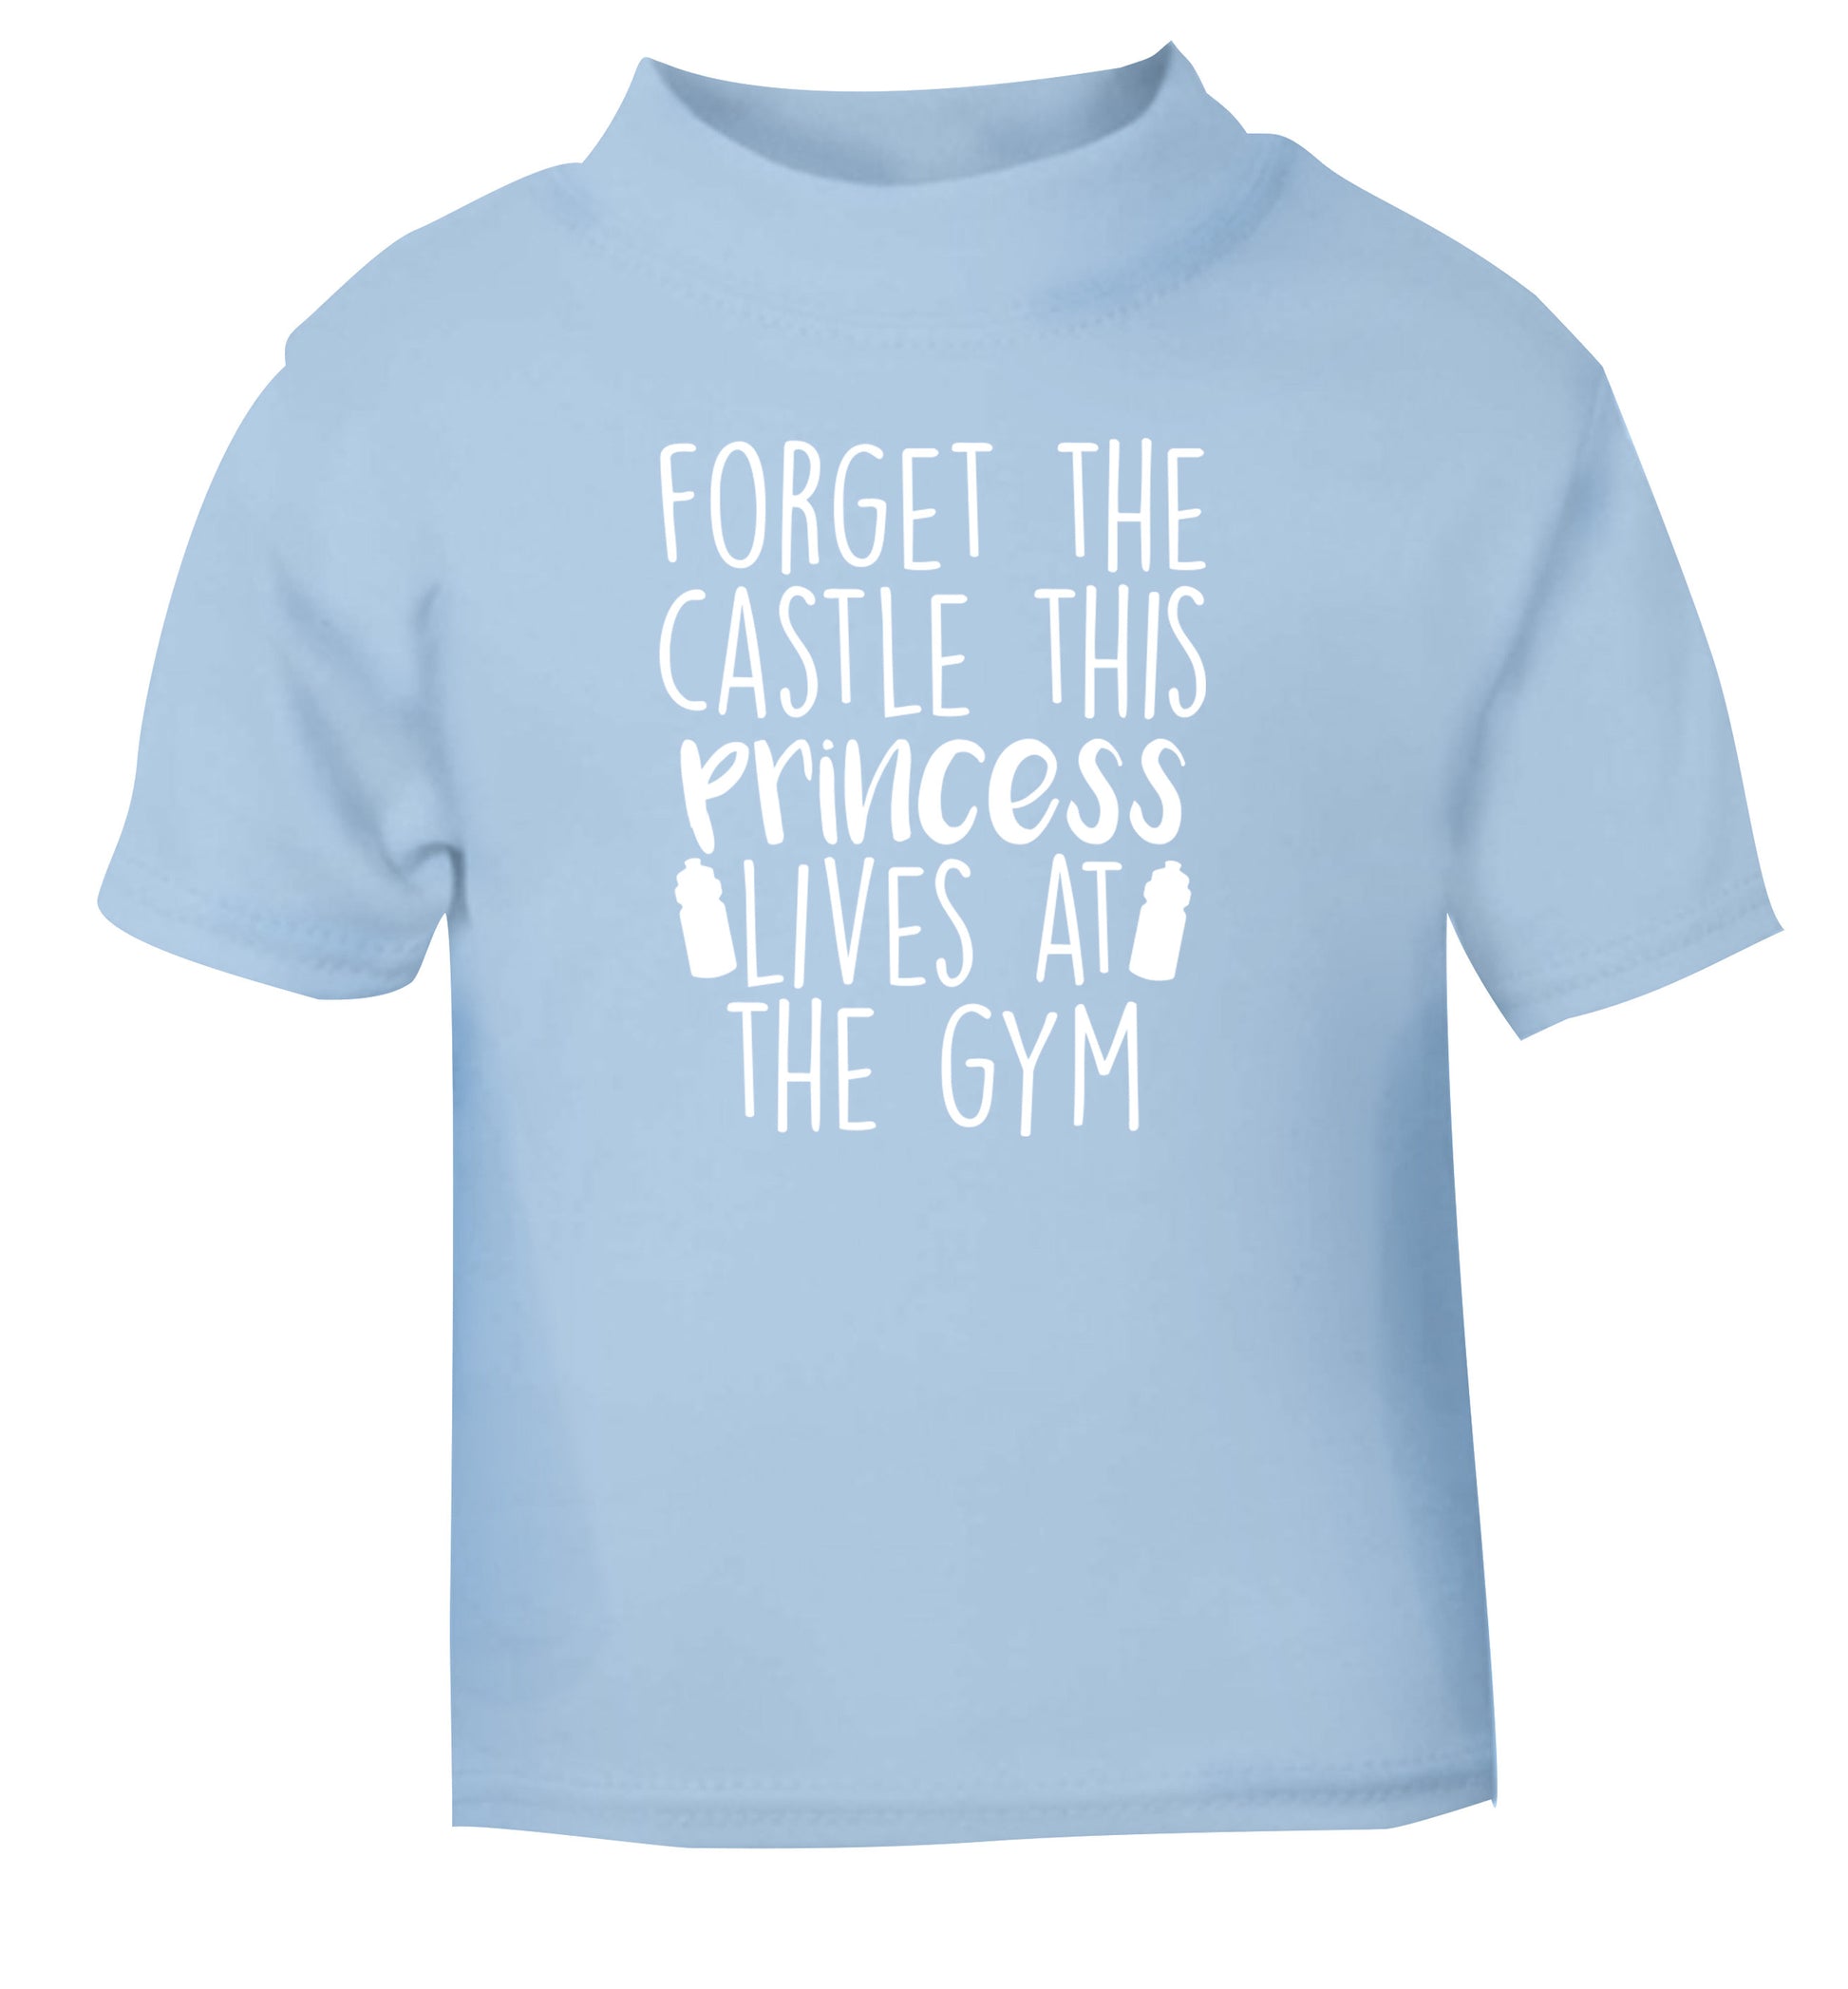 Forget the castle this princess lives at the gym light blue Baby Toddler Tshirt 2 Years